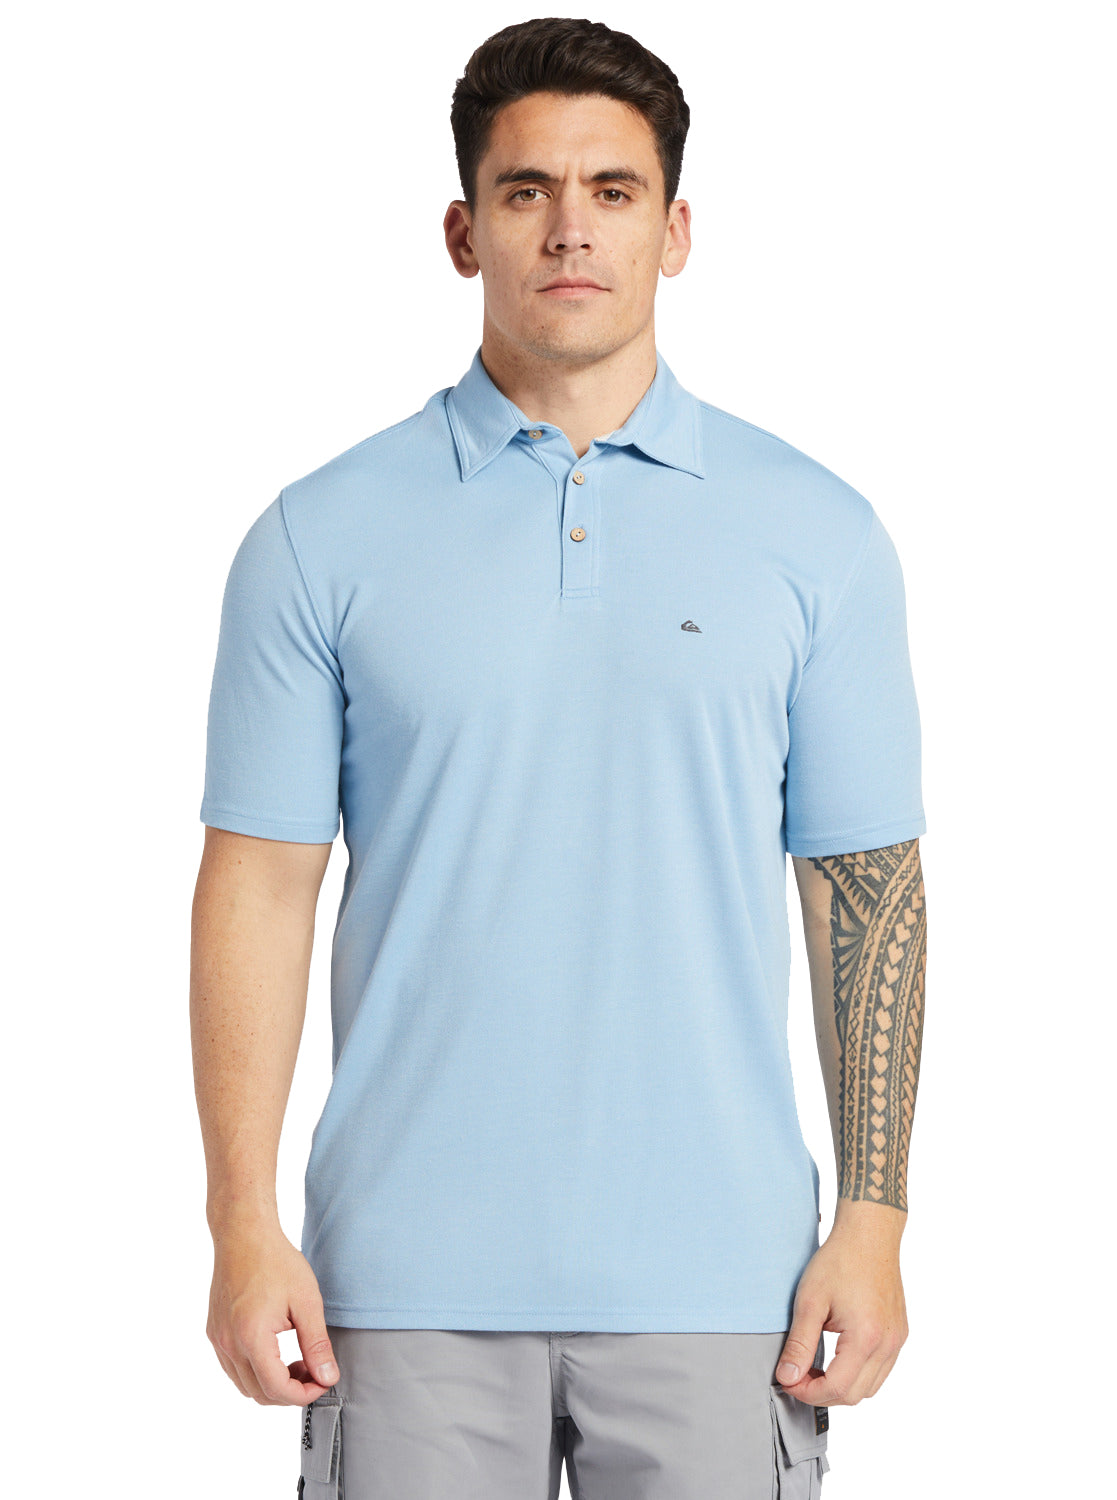 Quiksilver Waterman Waterpolo SS Polo Shirt BHC0 S